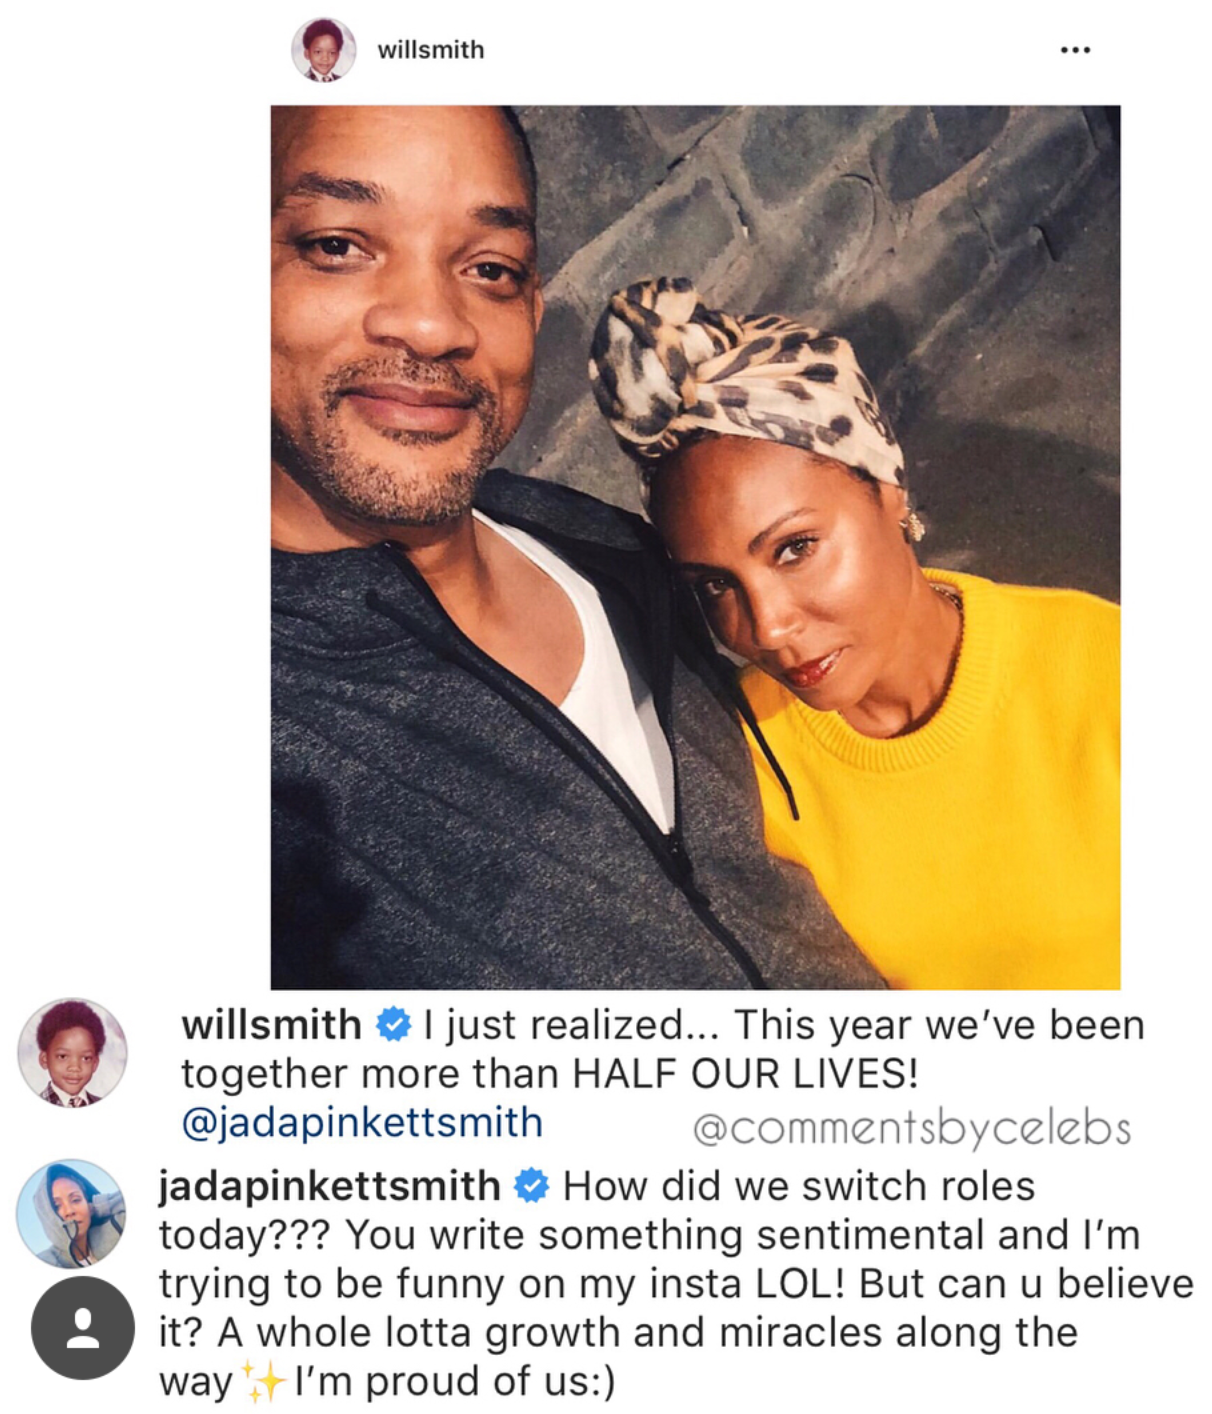 jada pinkett smith will smith 2019 - willsmith willsmith I just realized... This year we've been together more than Half Our Lives! jadapinkettsmith How did we switch roles today??? You write something sentimental and I'm trying to be funny on my insta Lo